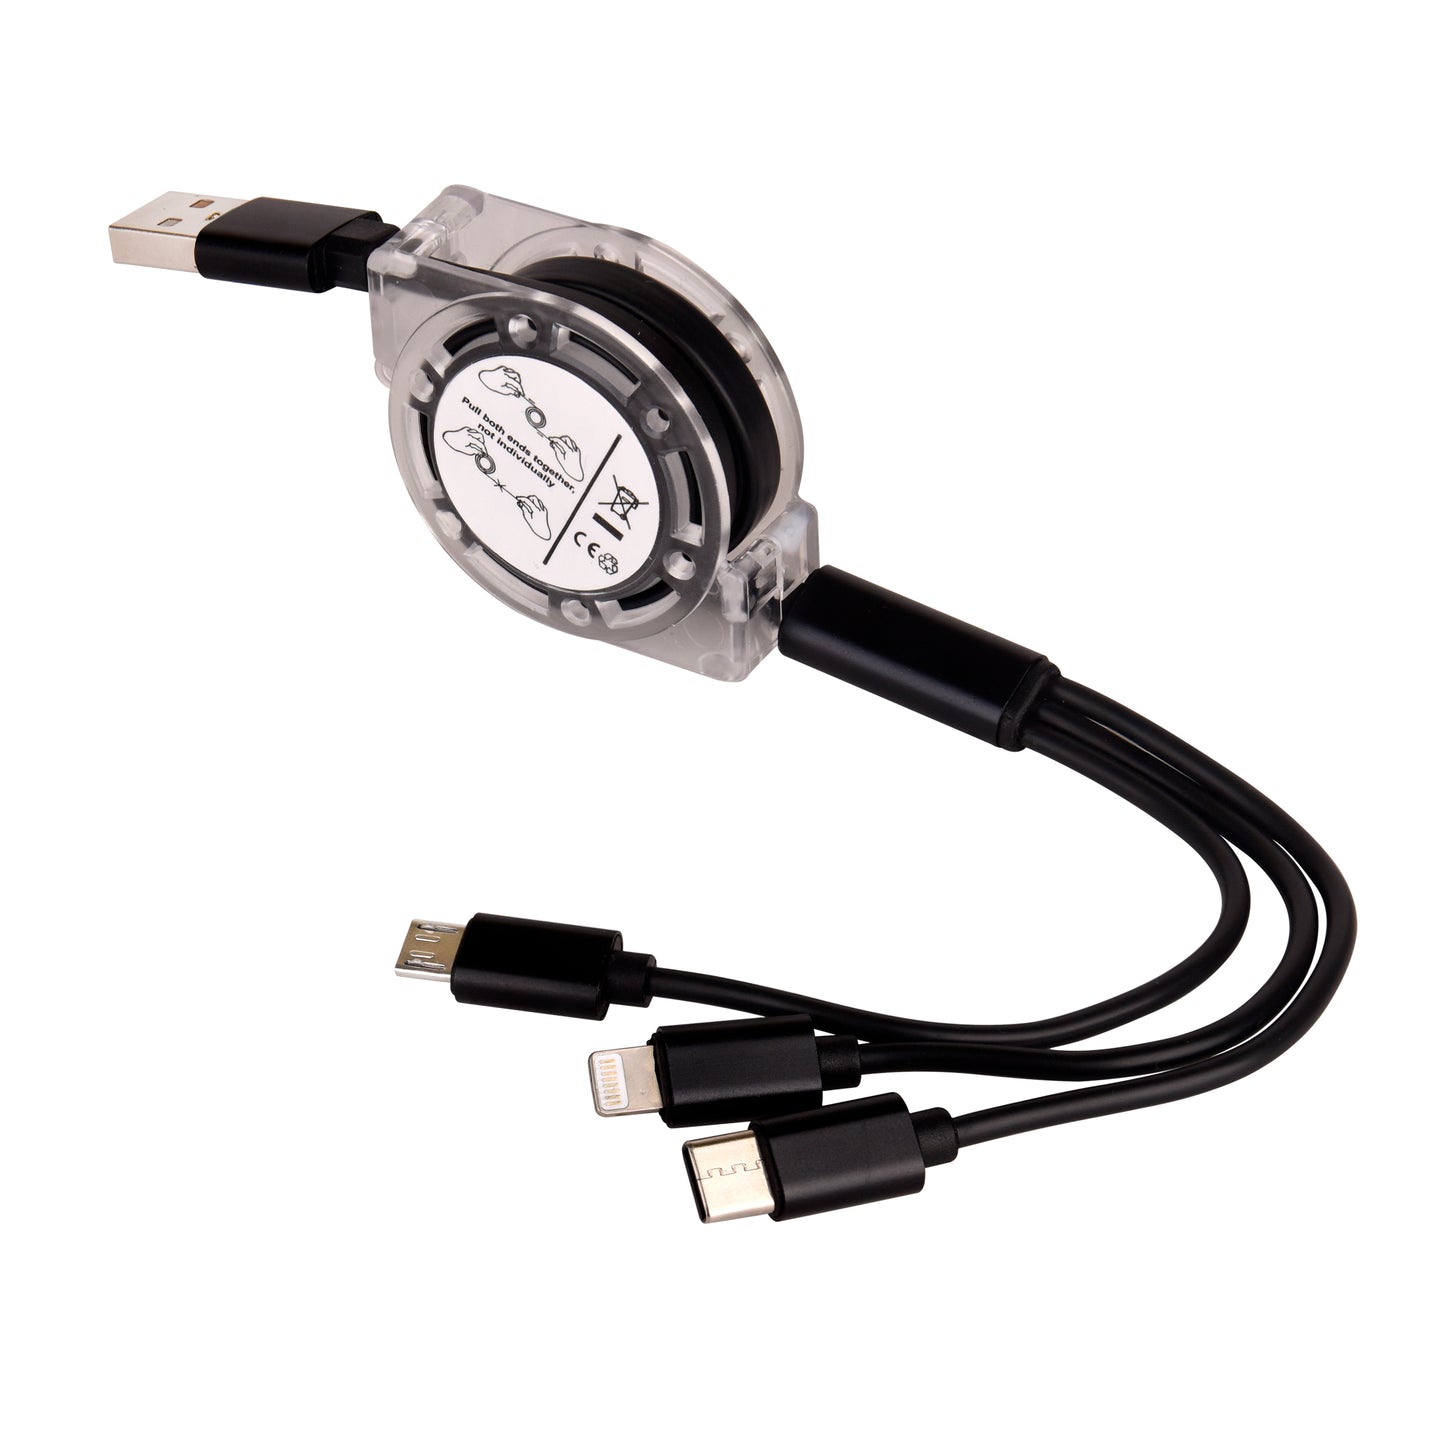 Yo-Yo charging cable 3in1 - For Office Use, Personal Use, or Corporate Gifting HK2528